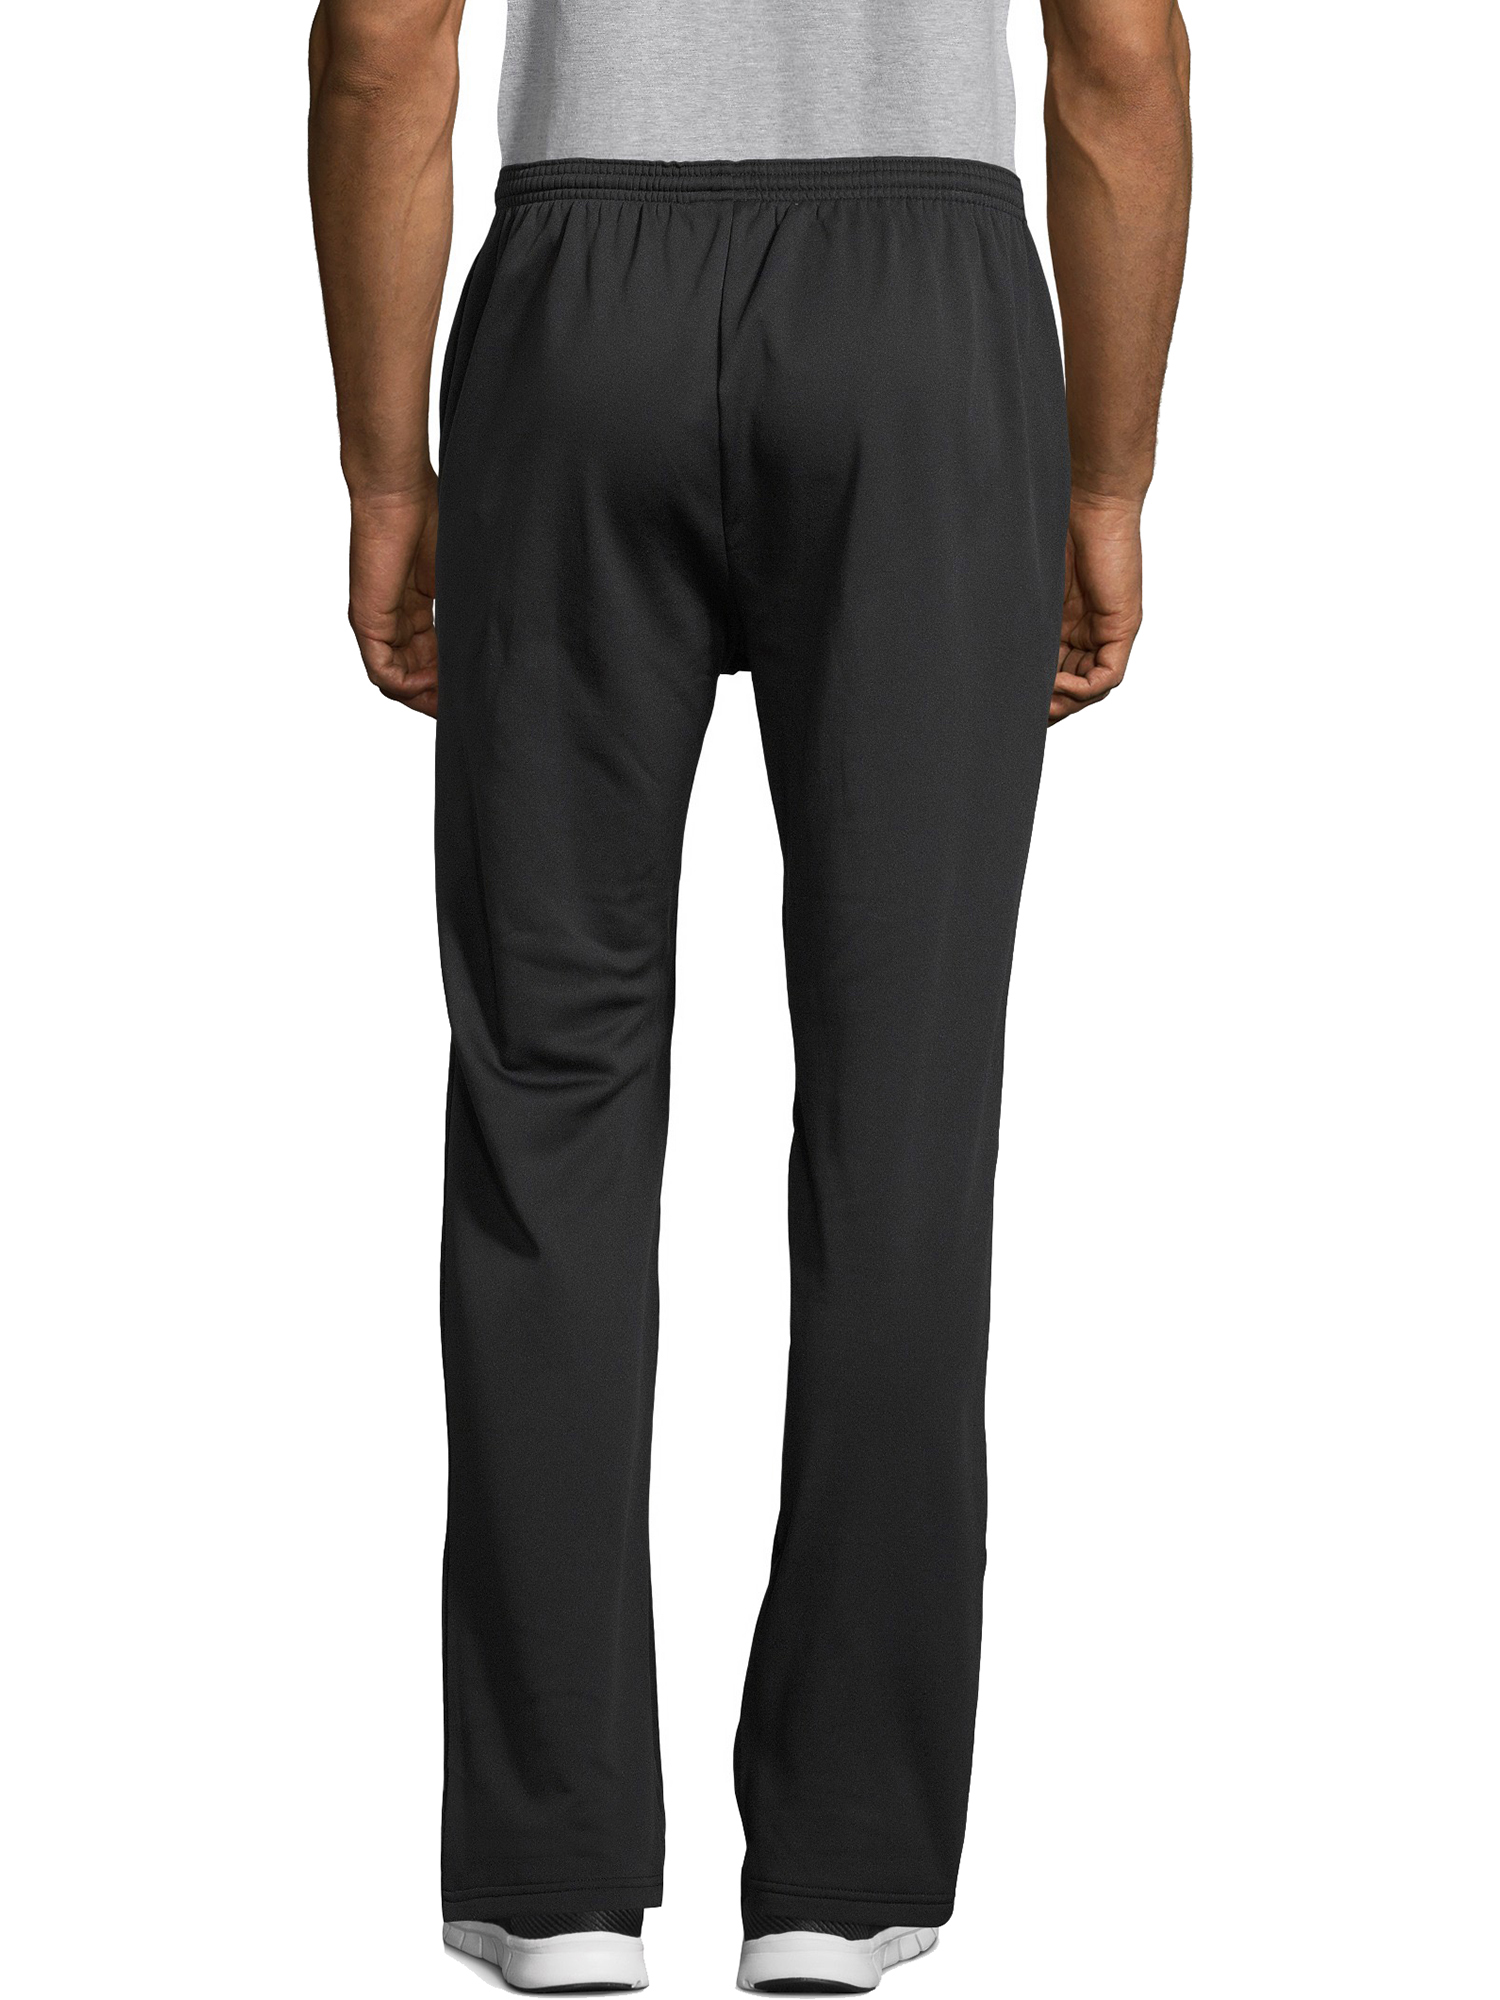 Hanes Sport Men's and Big Men's Performance Sweatpants with Pockets, Up to Size 2XL - image 4 of 5